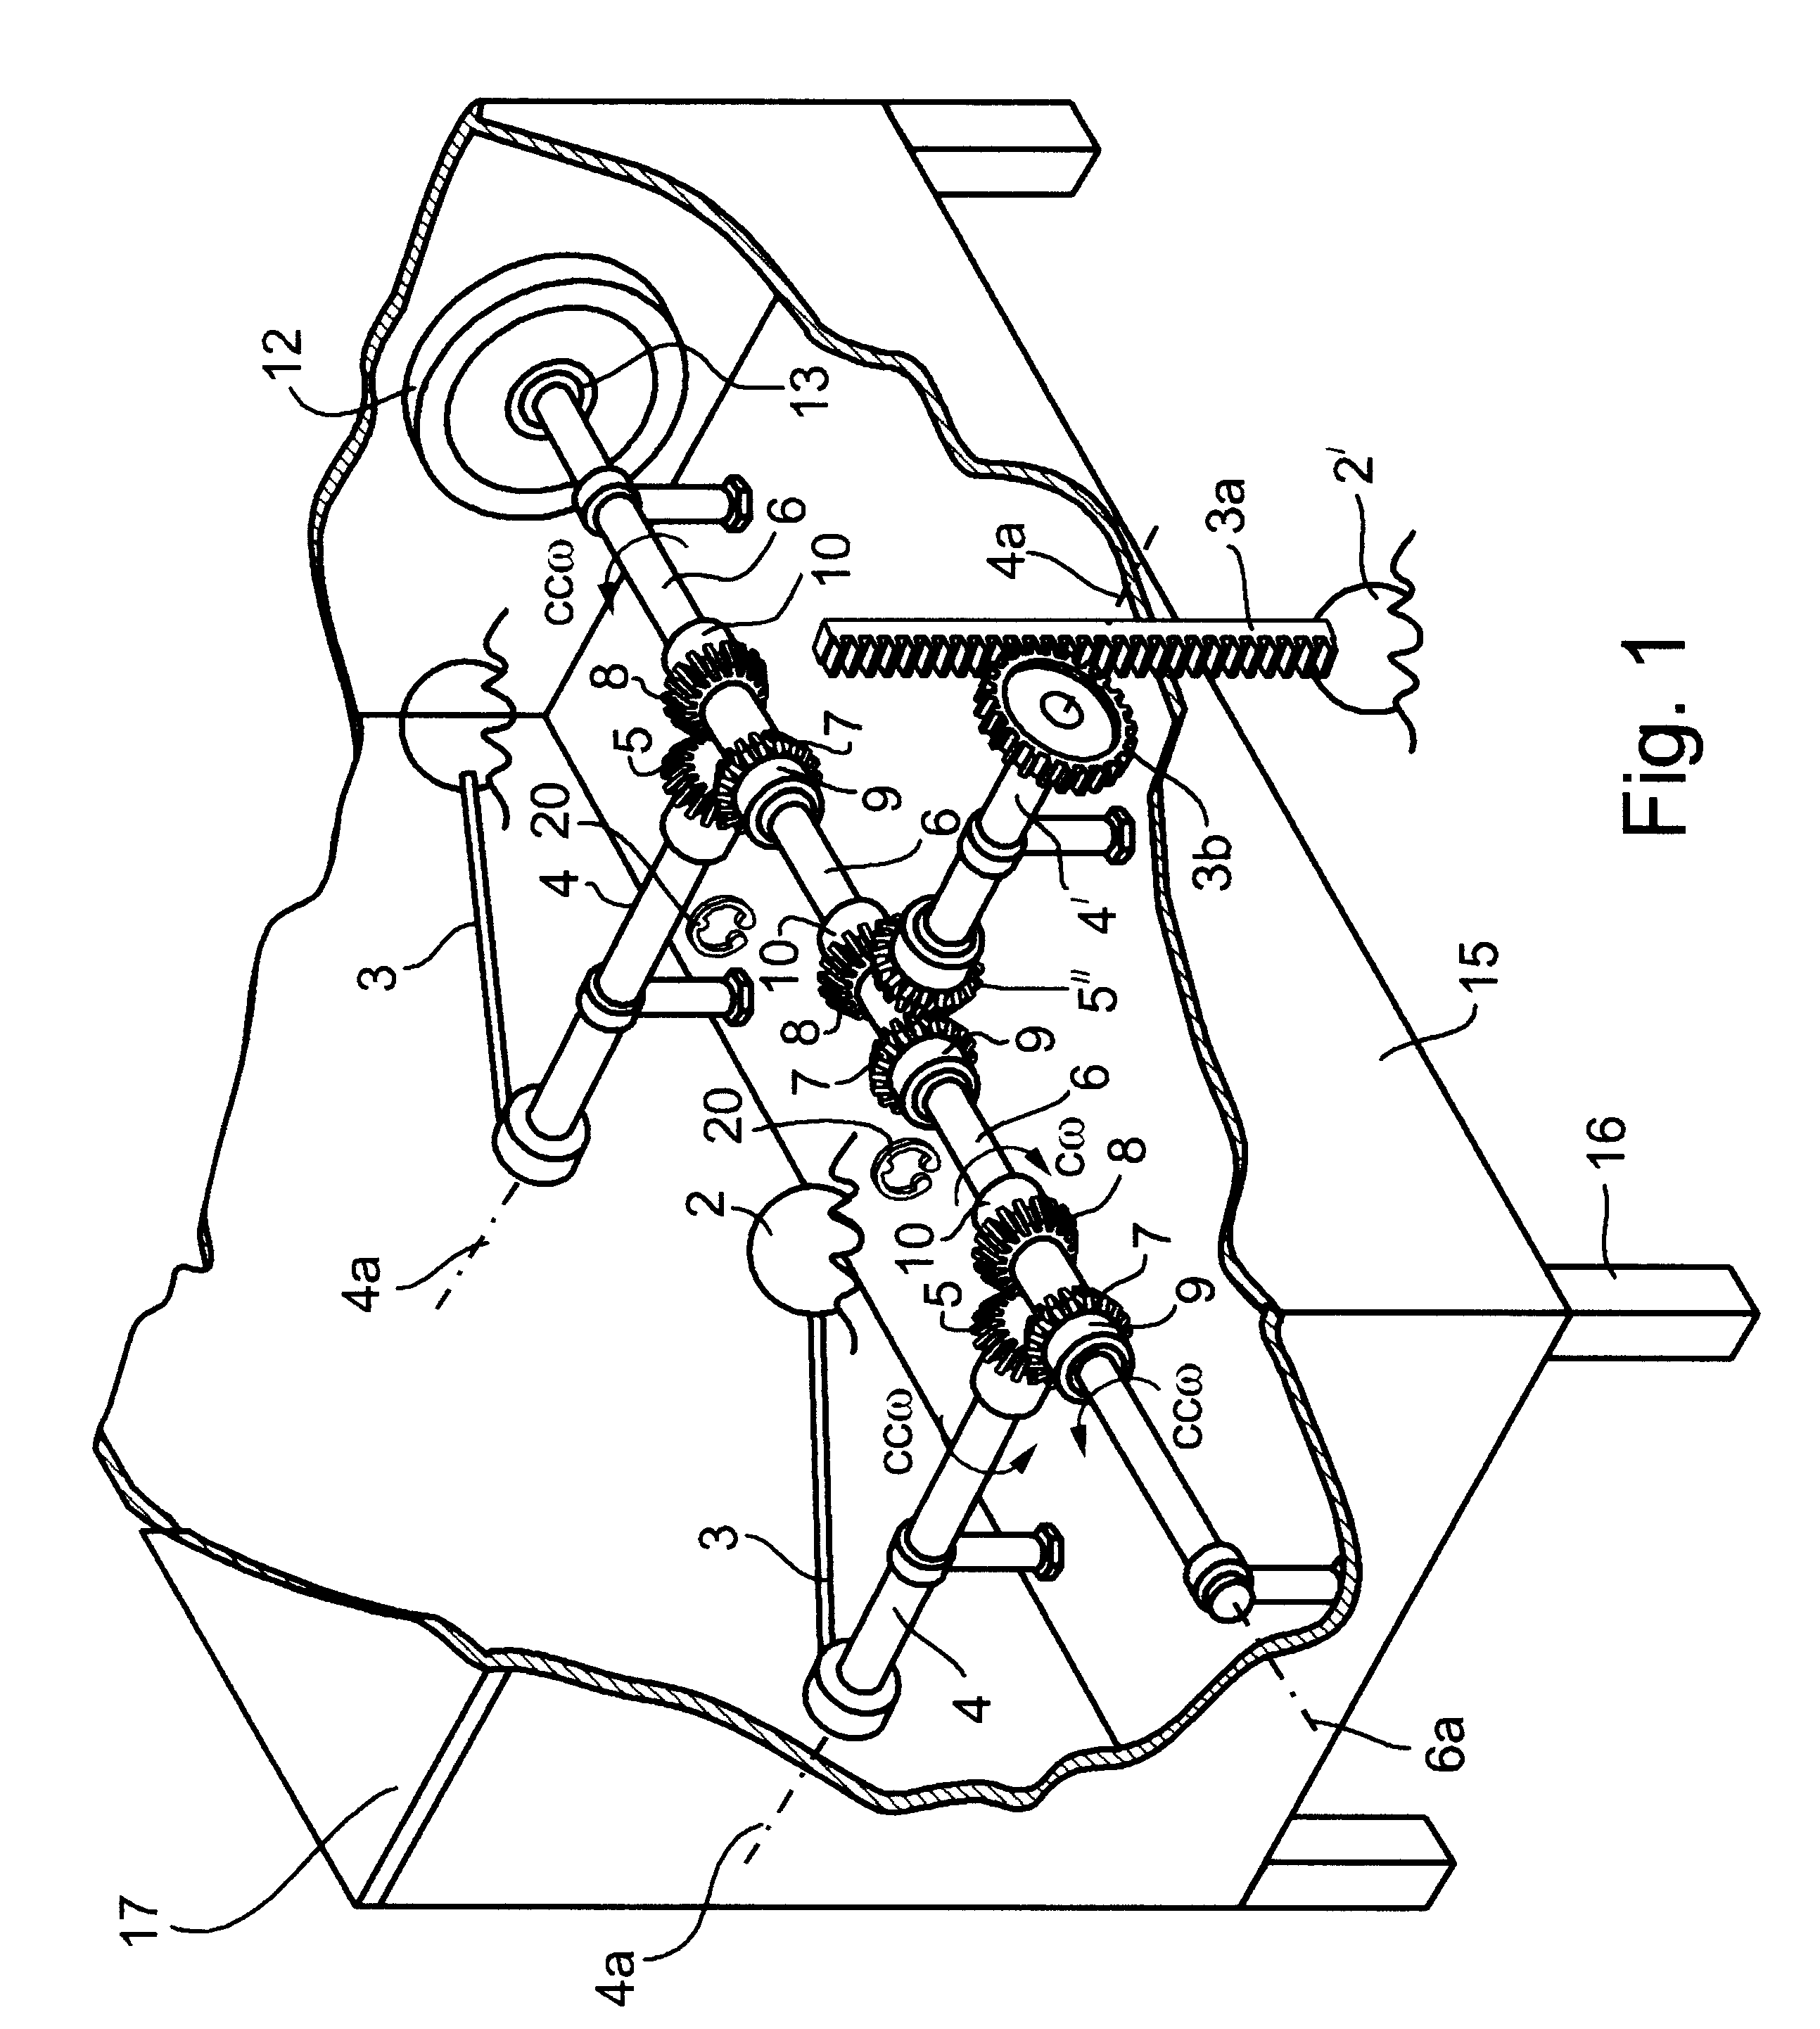 Bidirectional rotary motion-converter, wave motors, and various other applications thereof